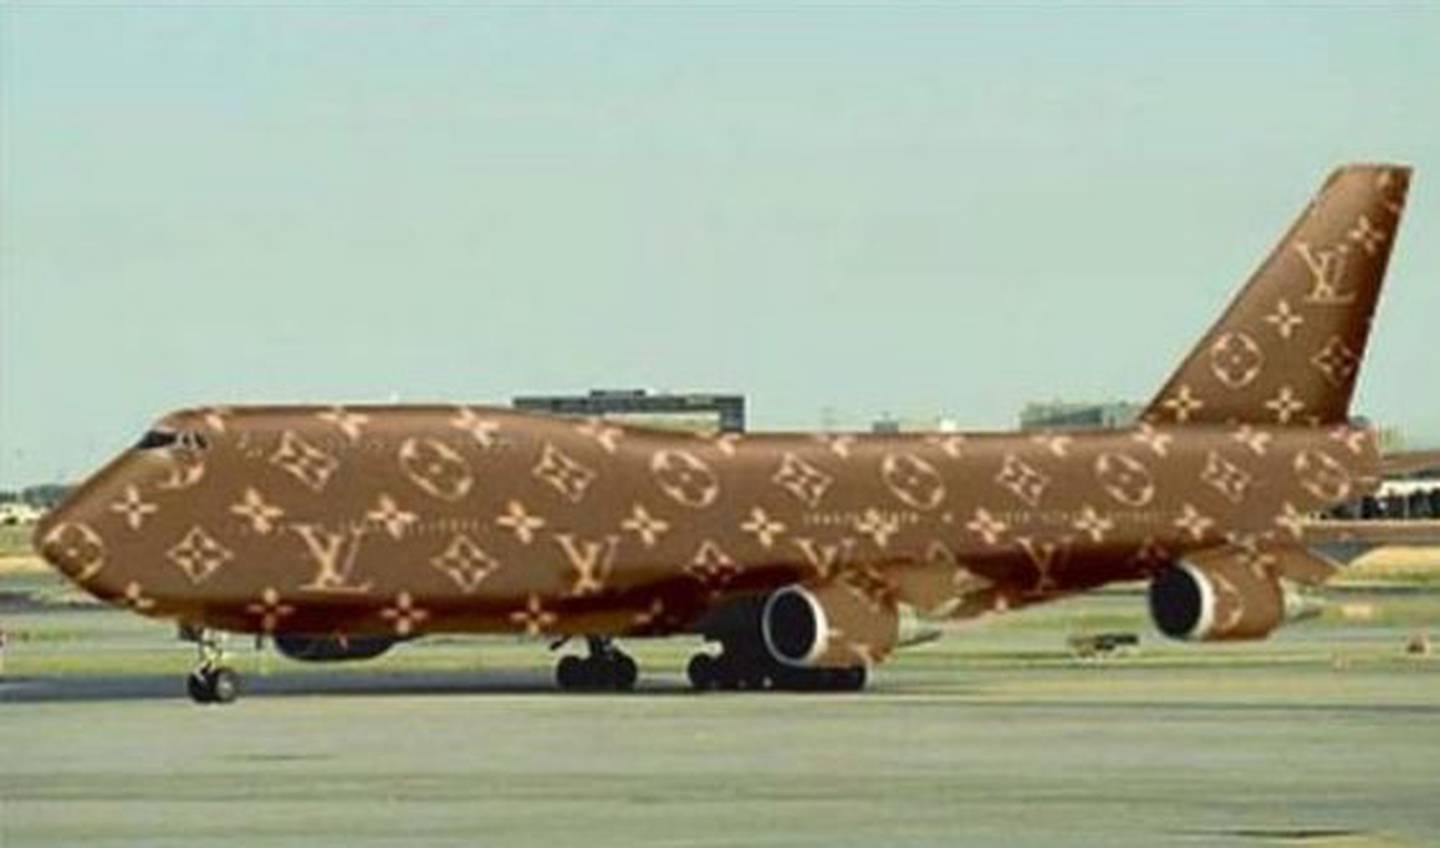 Social media users took to Pinterest to post mocked up images of planes covered in the Louis Vuitton monogram. Courtesy Pinterest